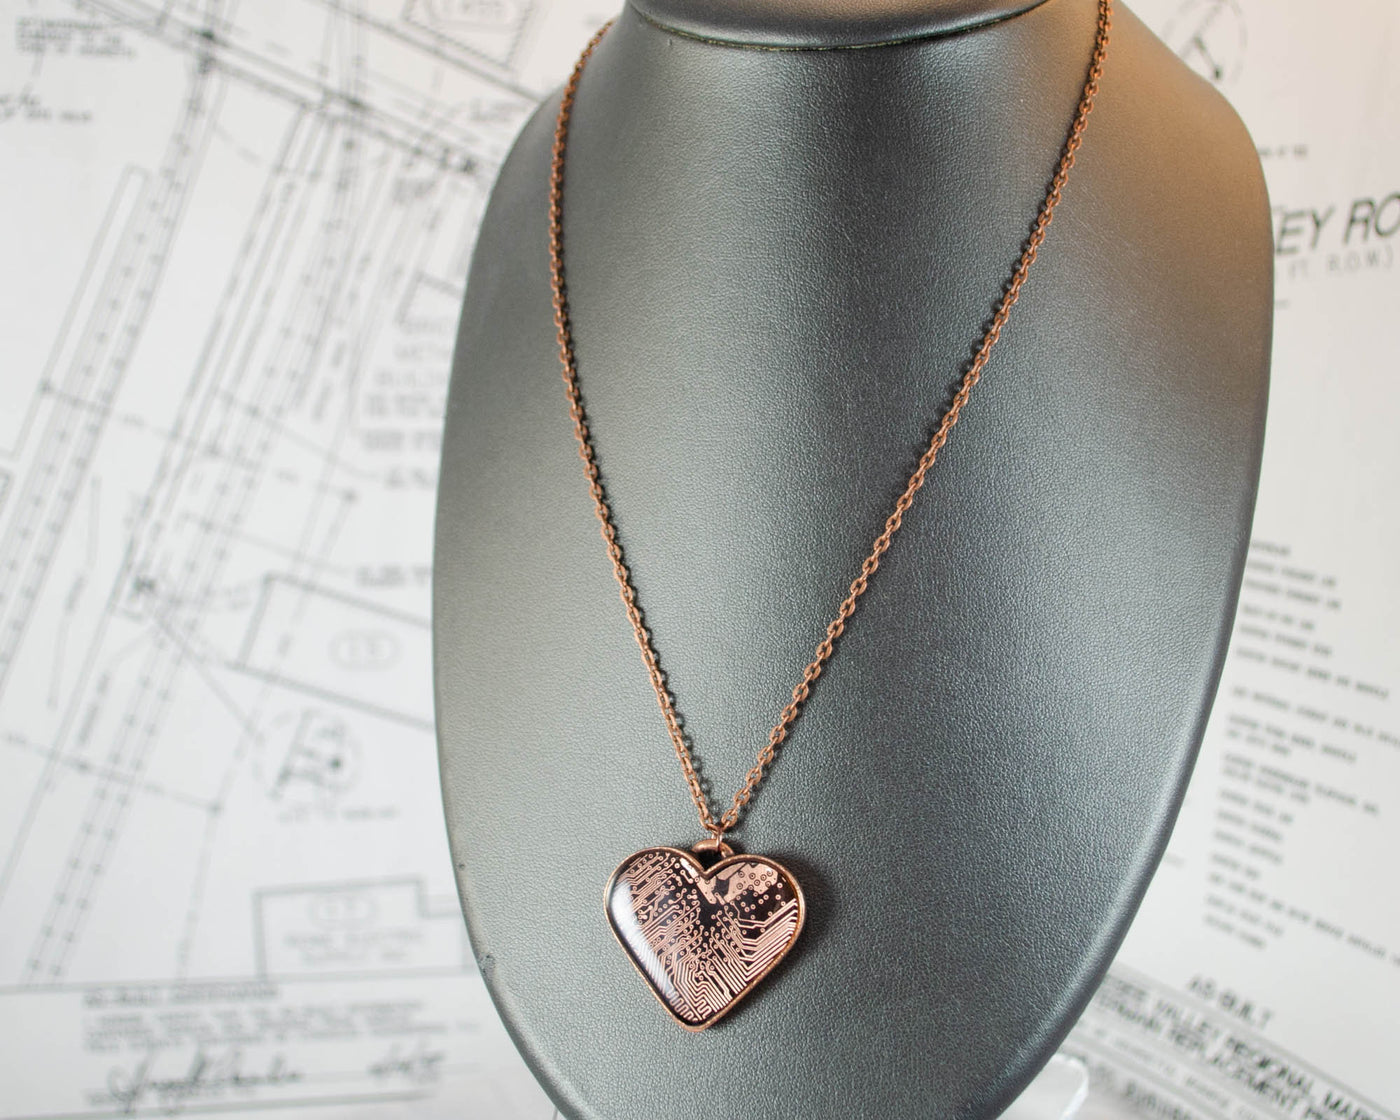 Copper Circuit Board Heart Necklace, Valentines Day Gift